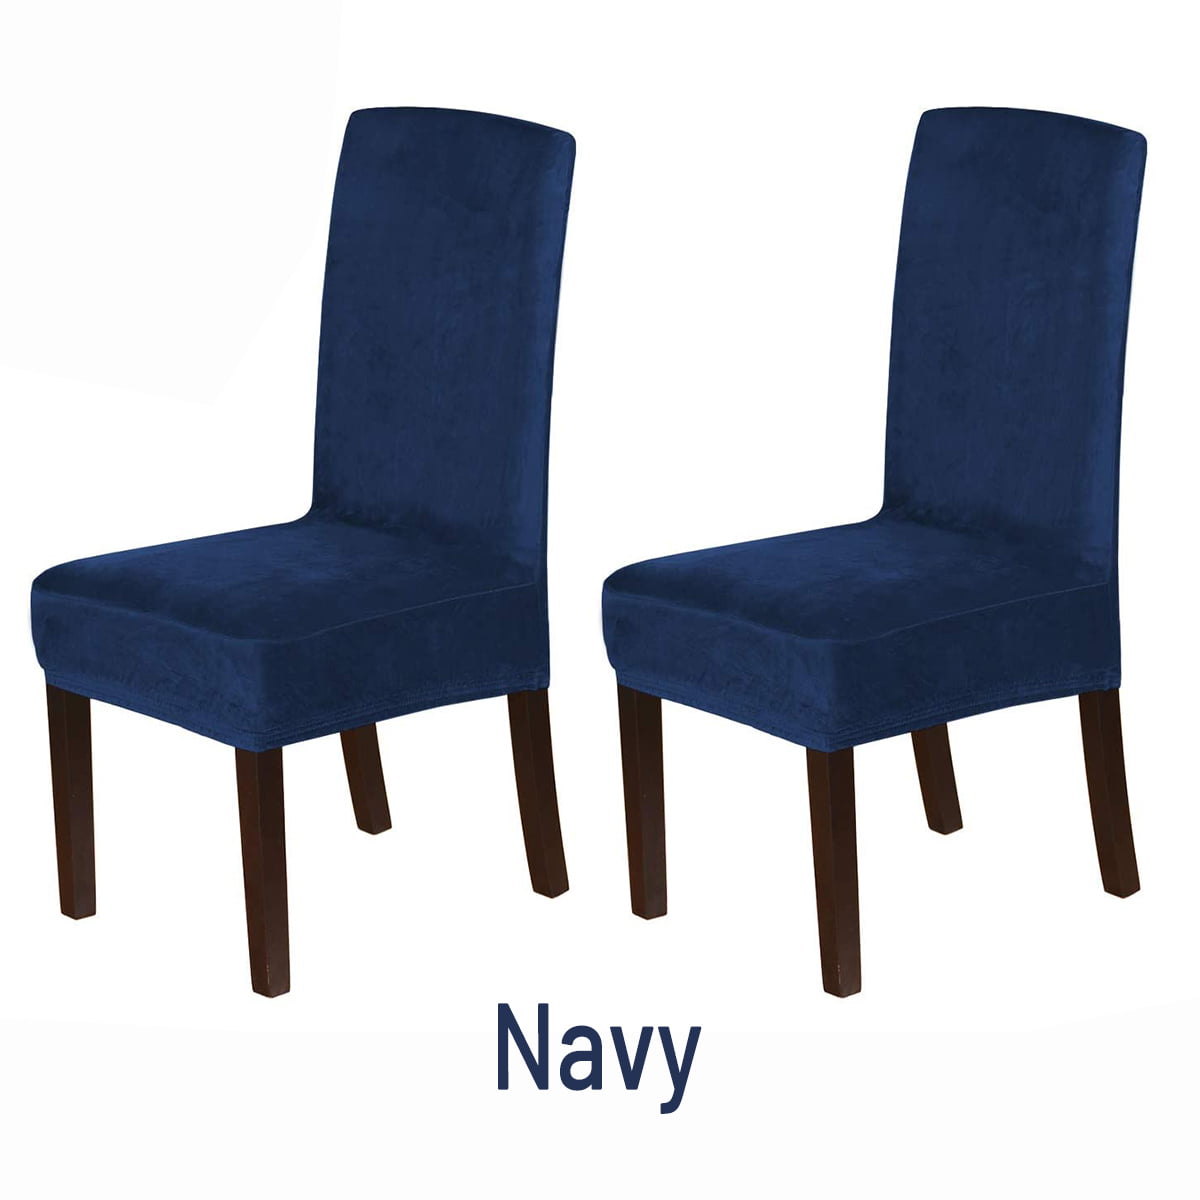 Velvet Spandex Chair Covers, Navy Parsons Chair Covers